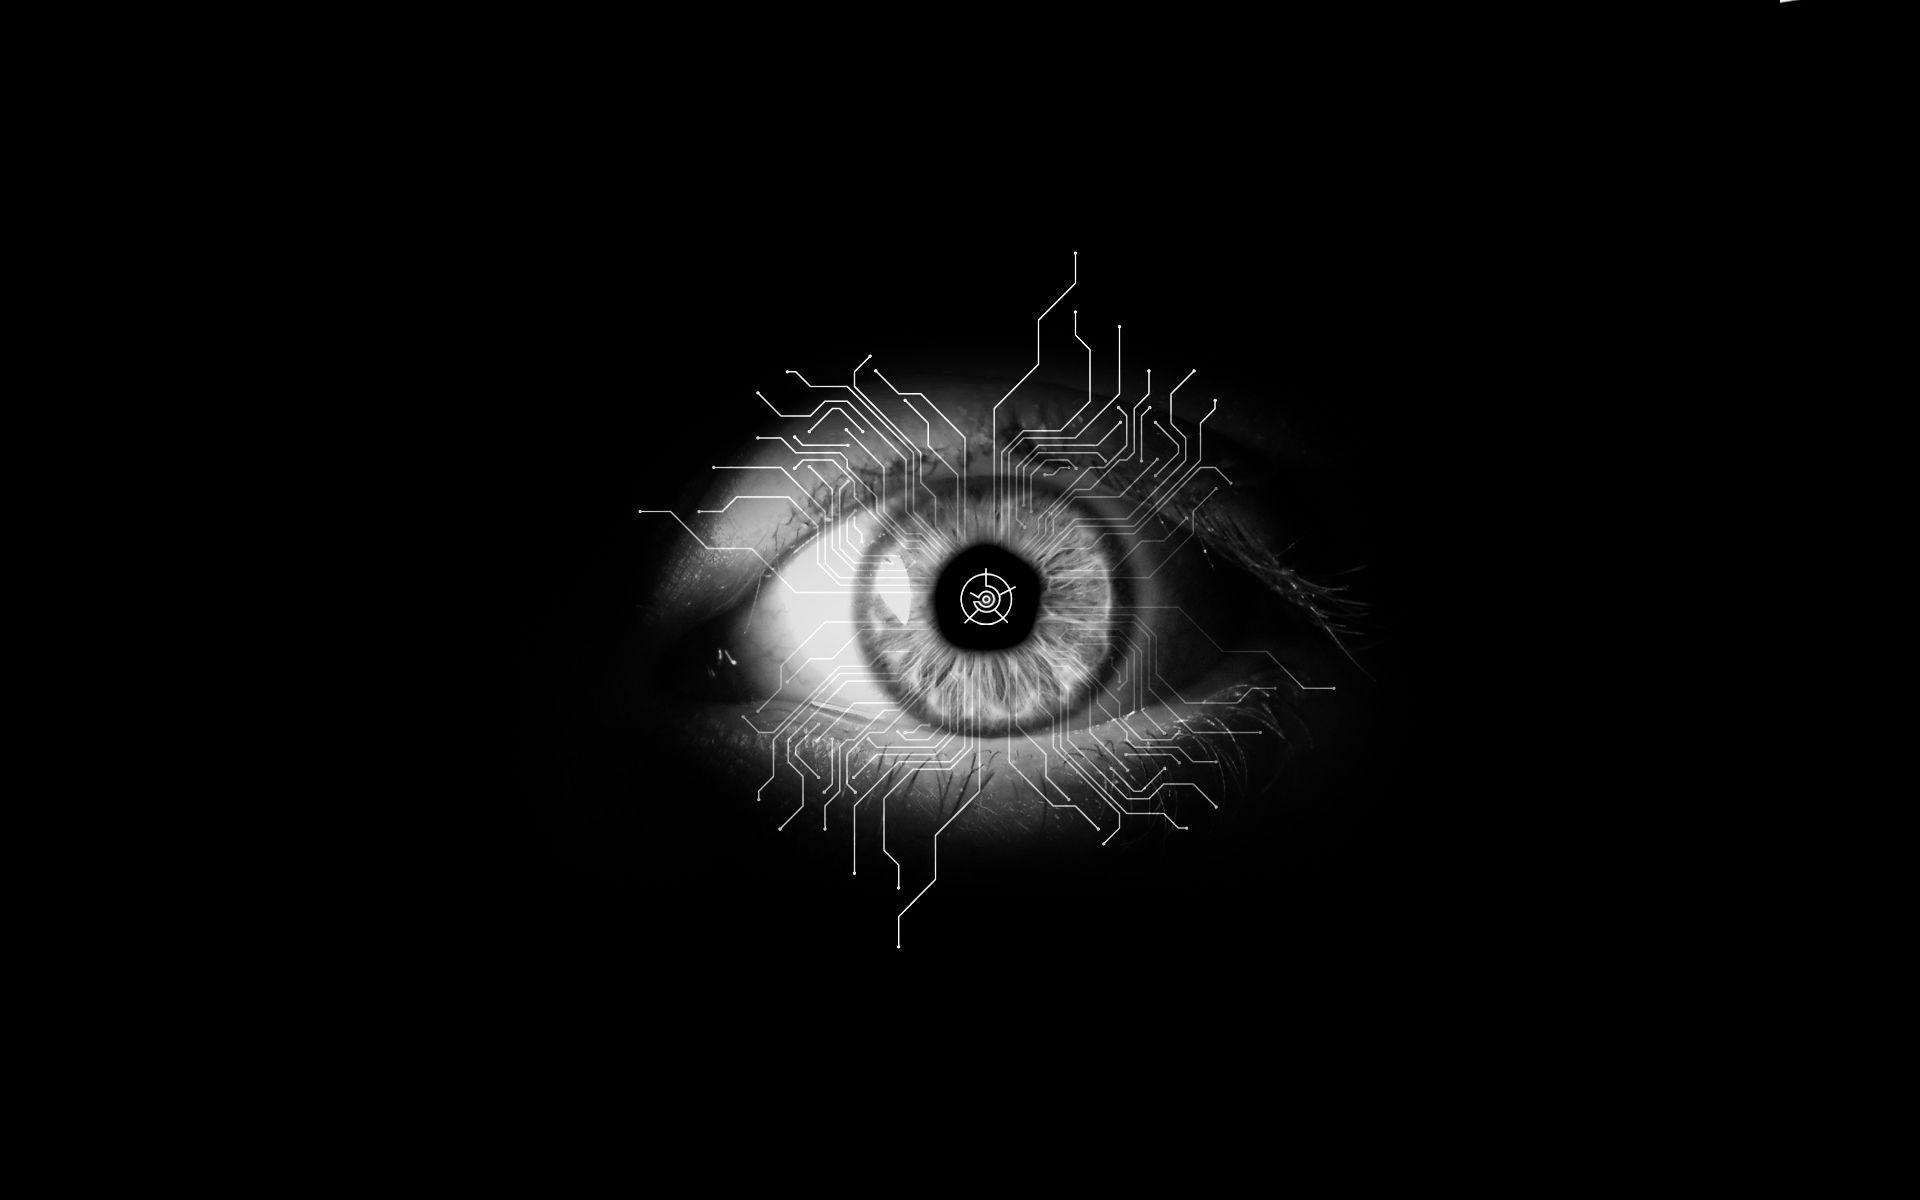 The eye of a person in black and white - Eyes